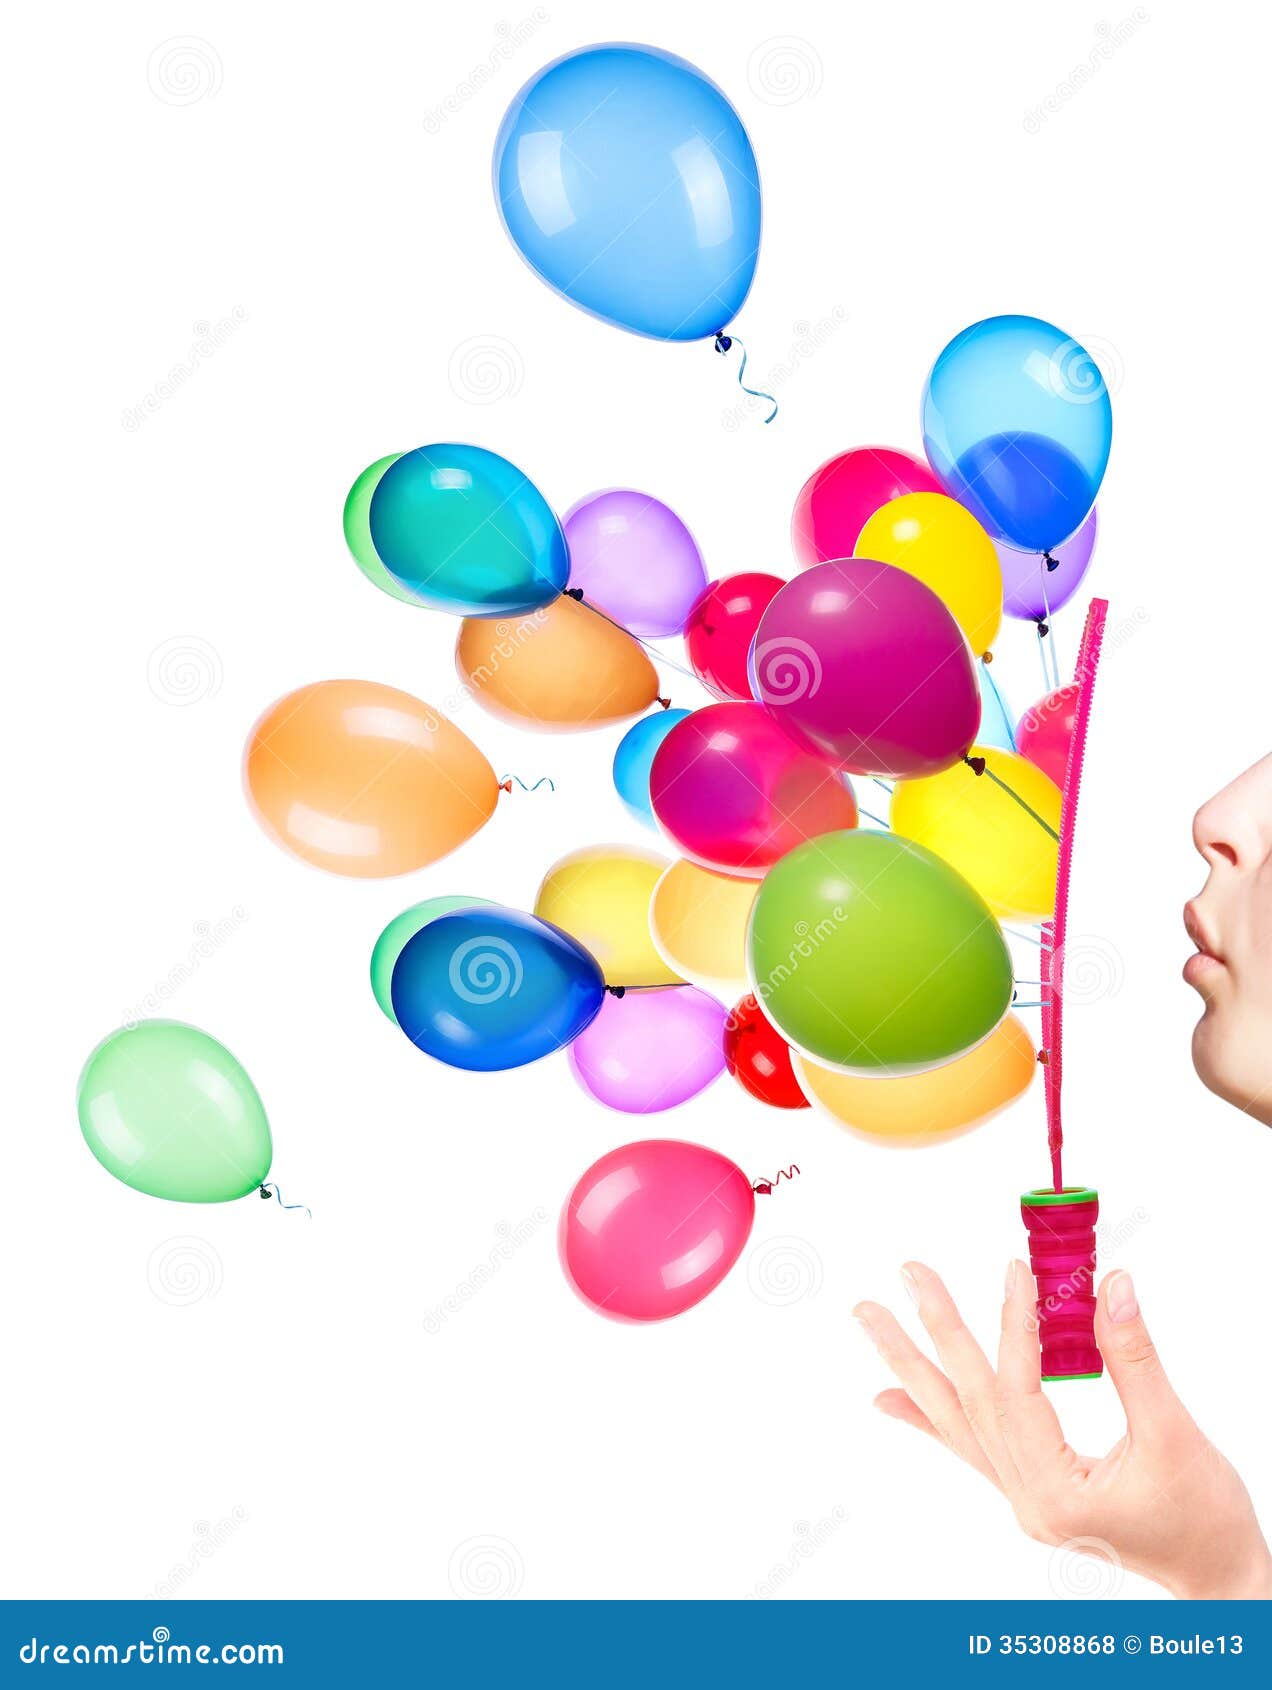 Bubble Wand And Flying Balloons Stock Photo - Image of green, child ...